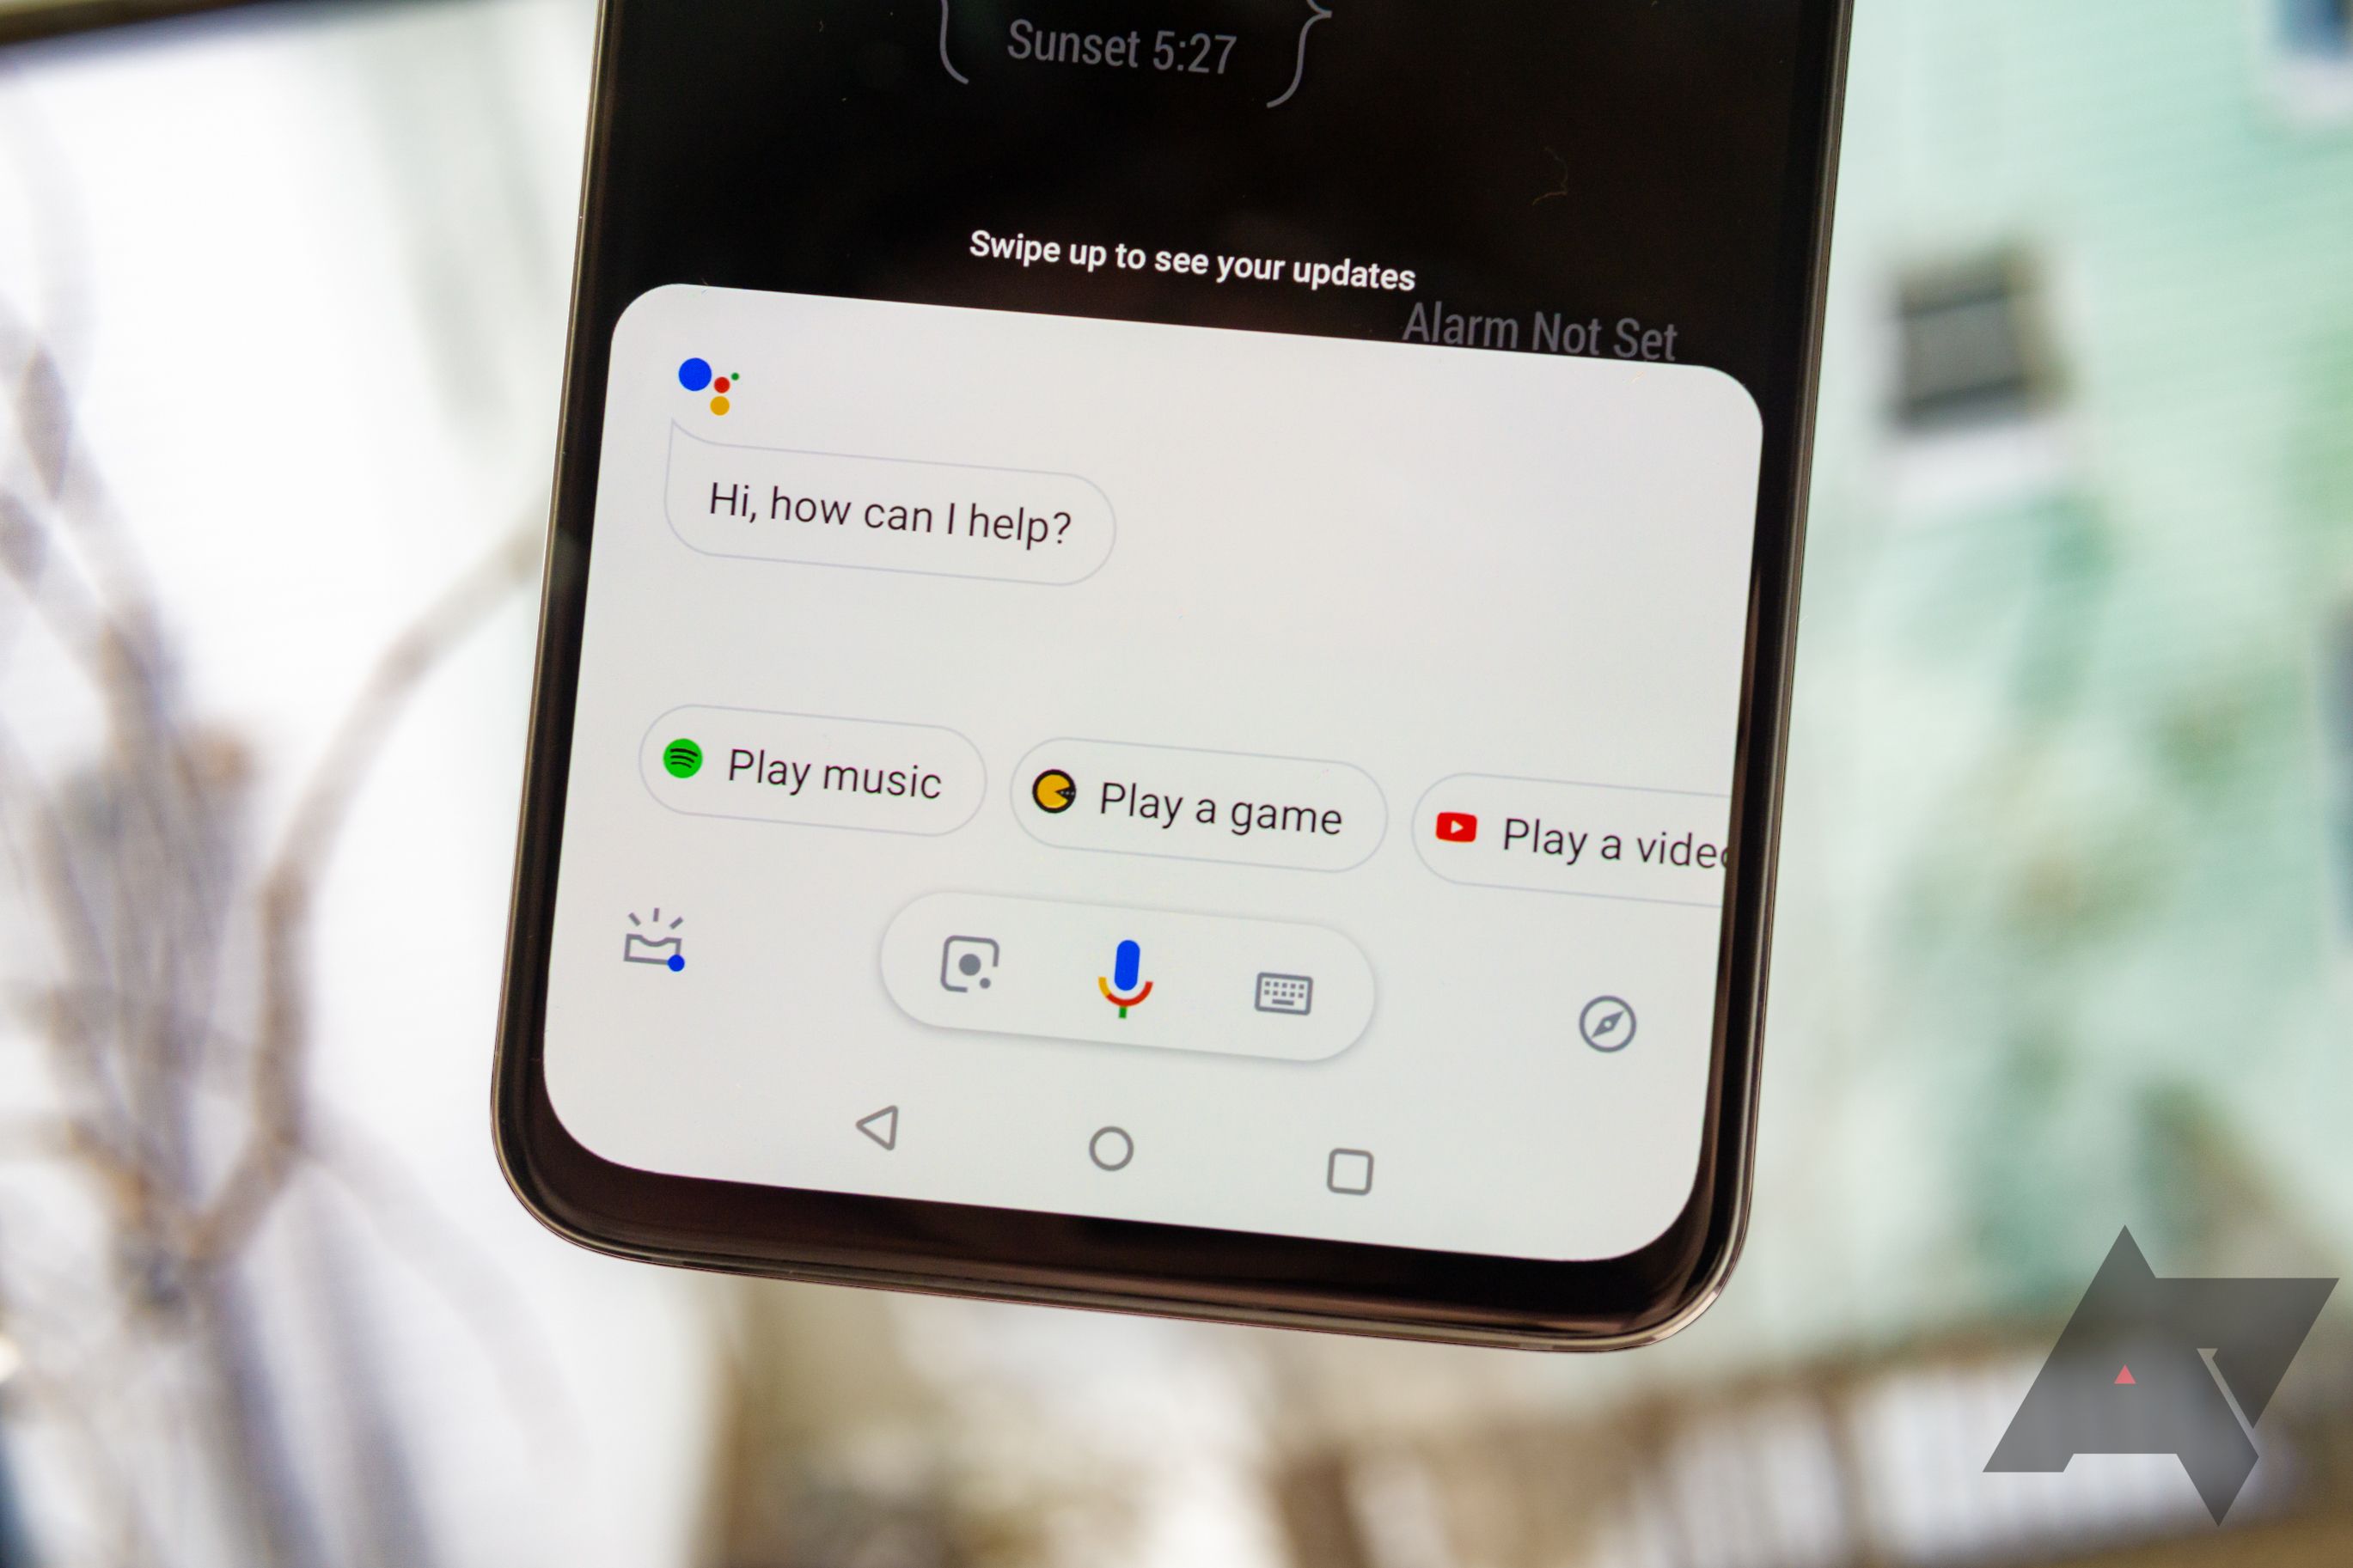 Google Assistant spotted playing dress-up, hinting at Android 12